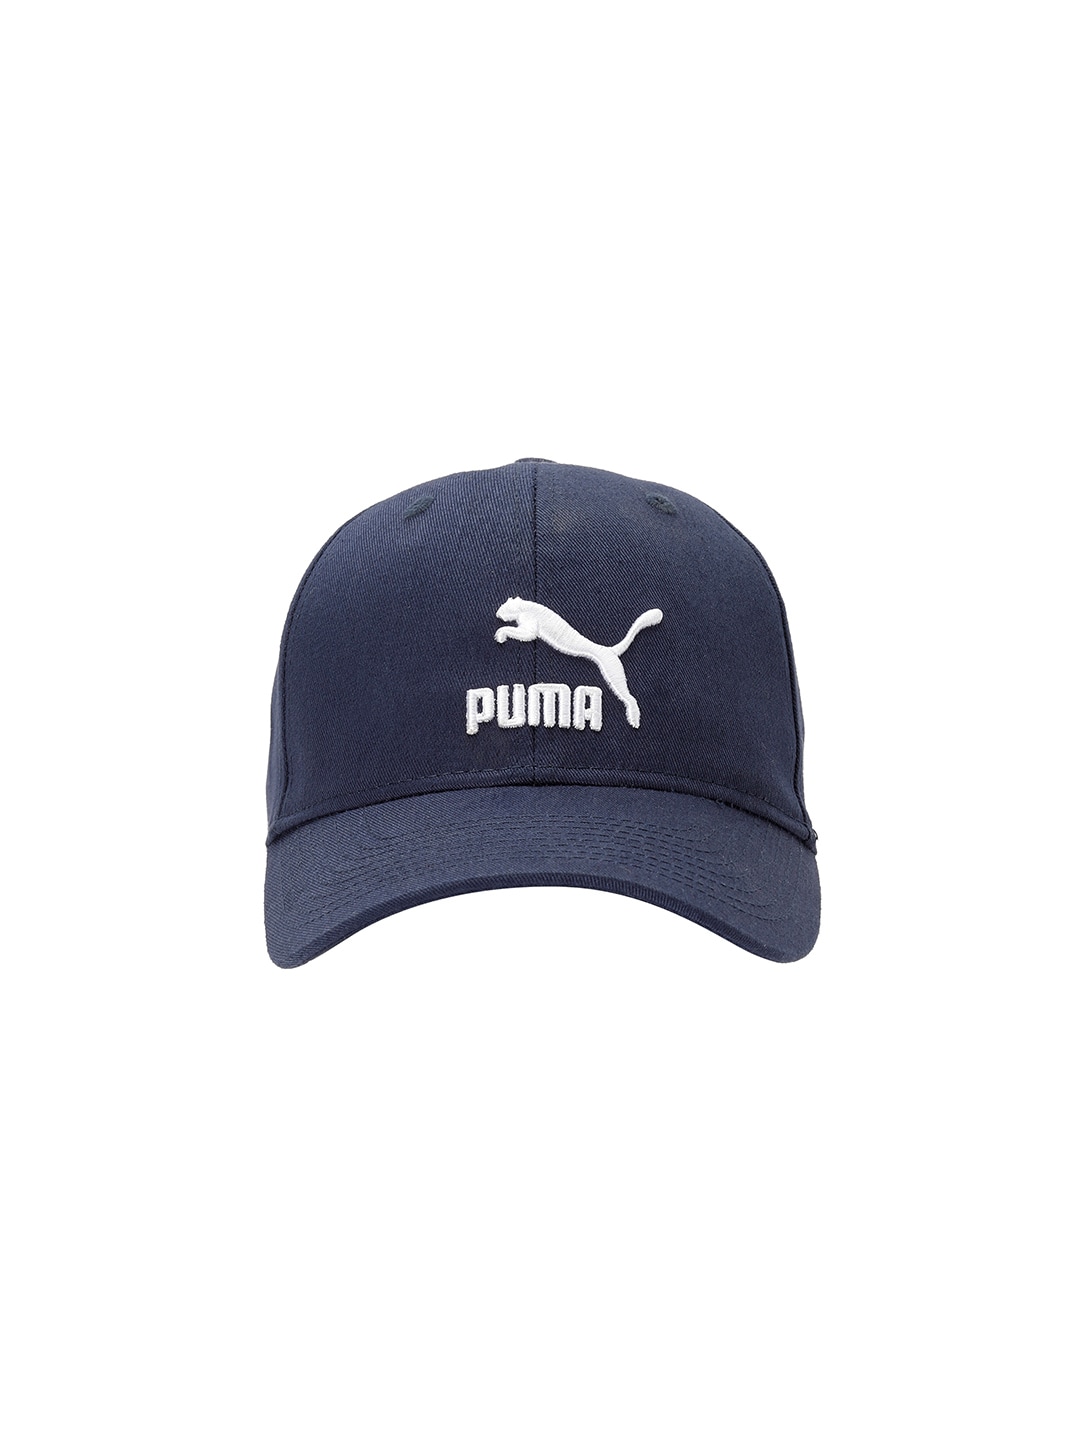 Puma Unisex Navy Blue Embroidered Archive Logo Baseball Cap Price in India